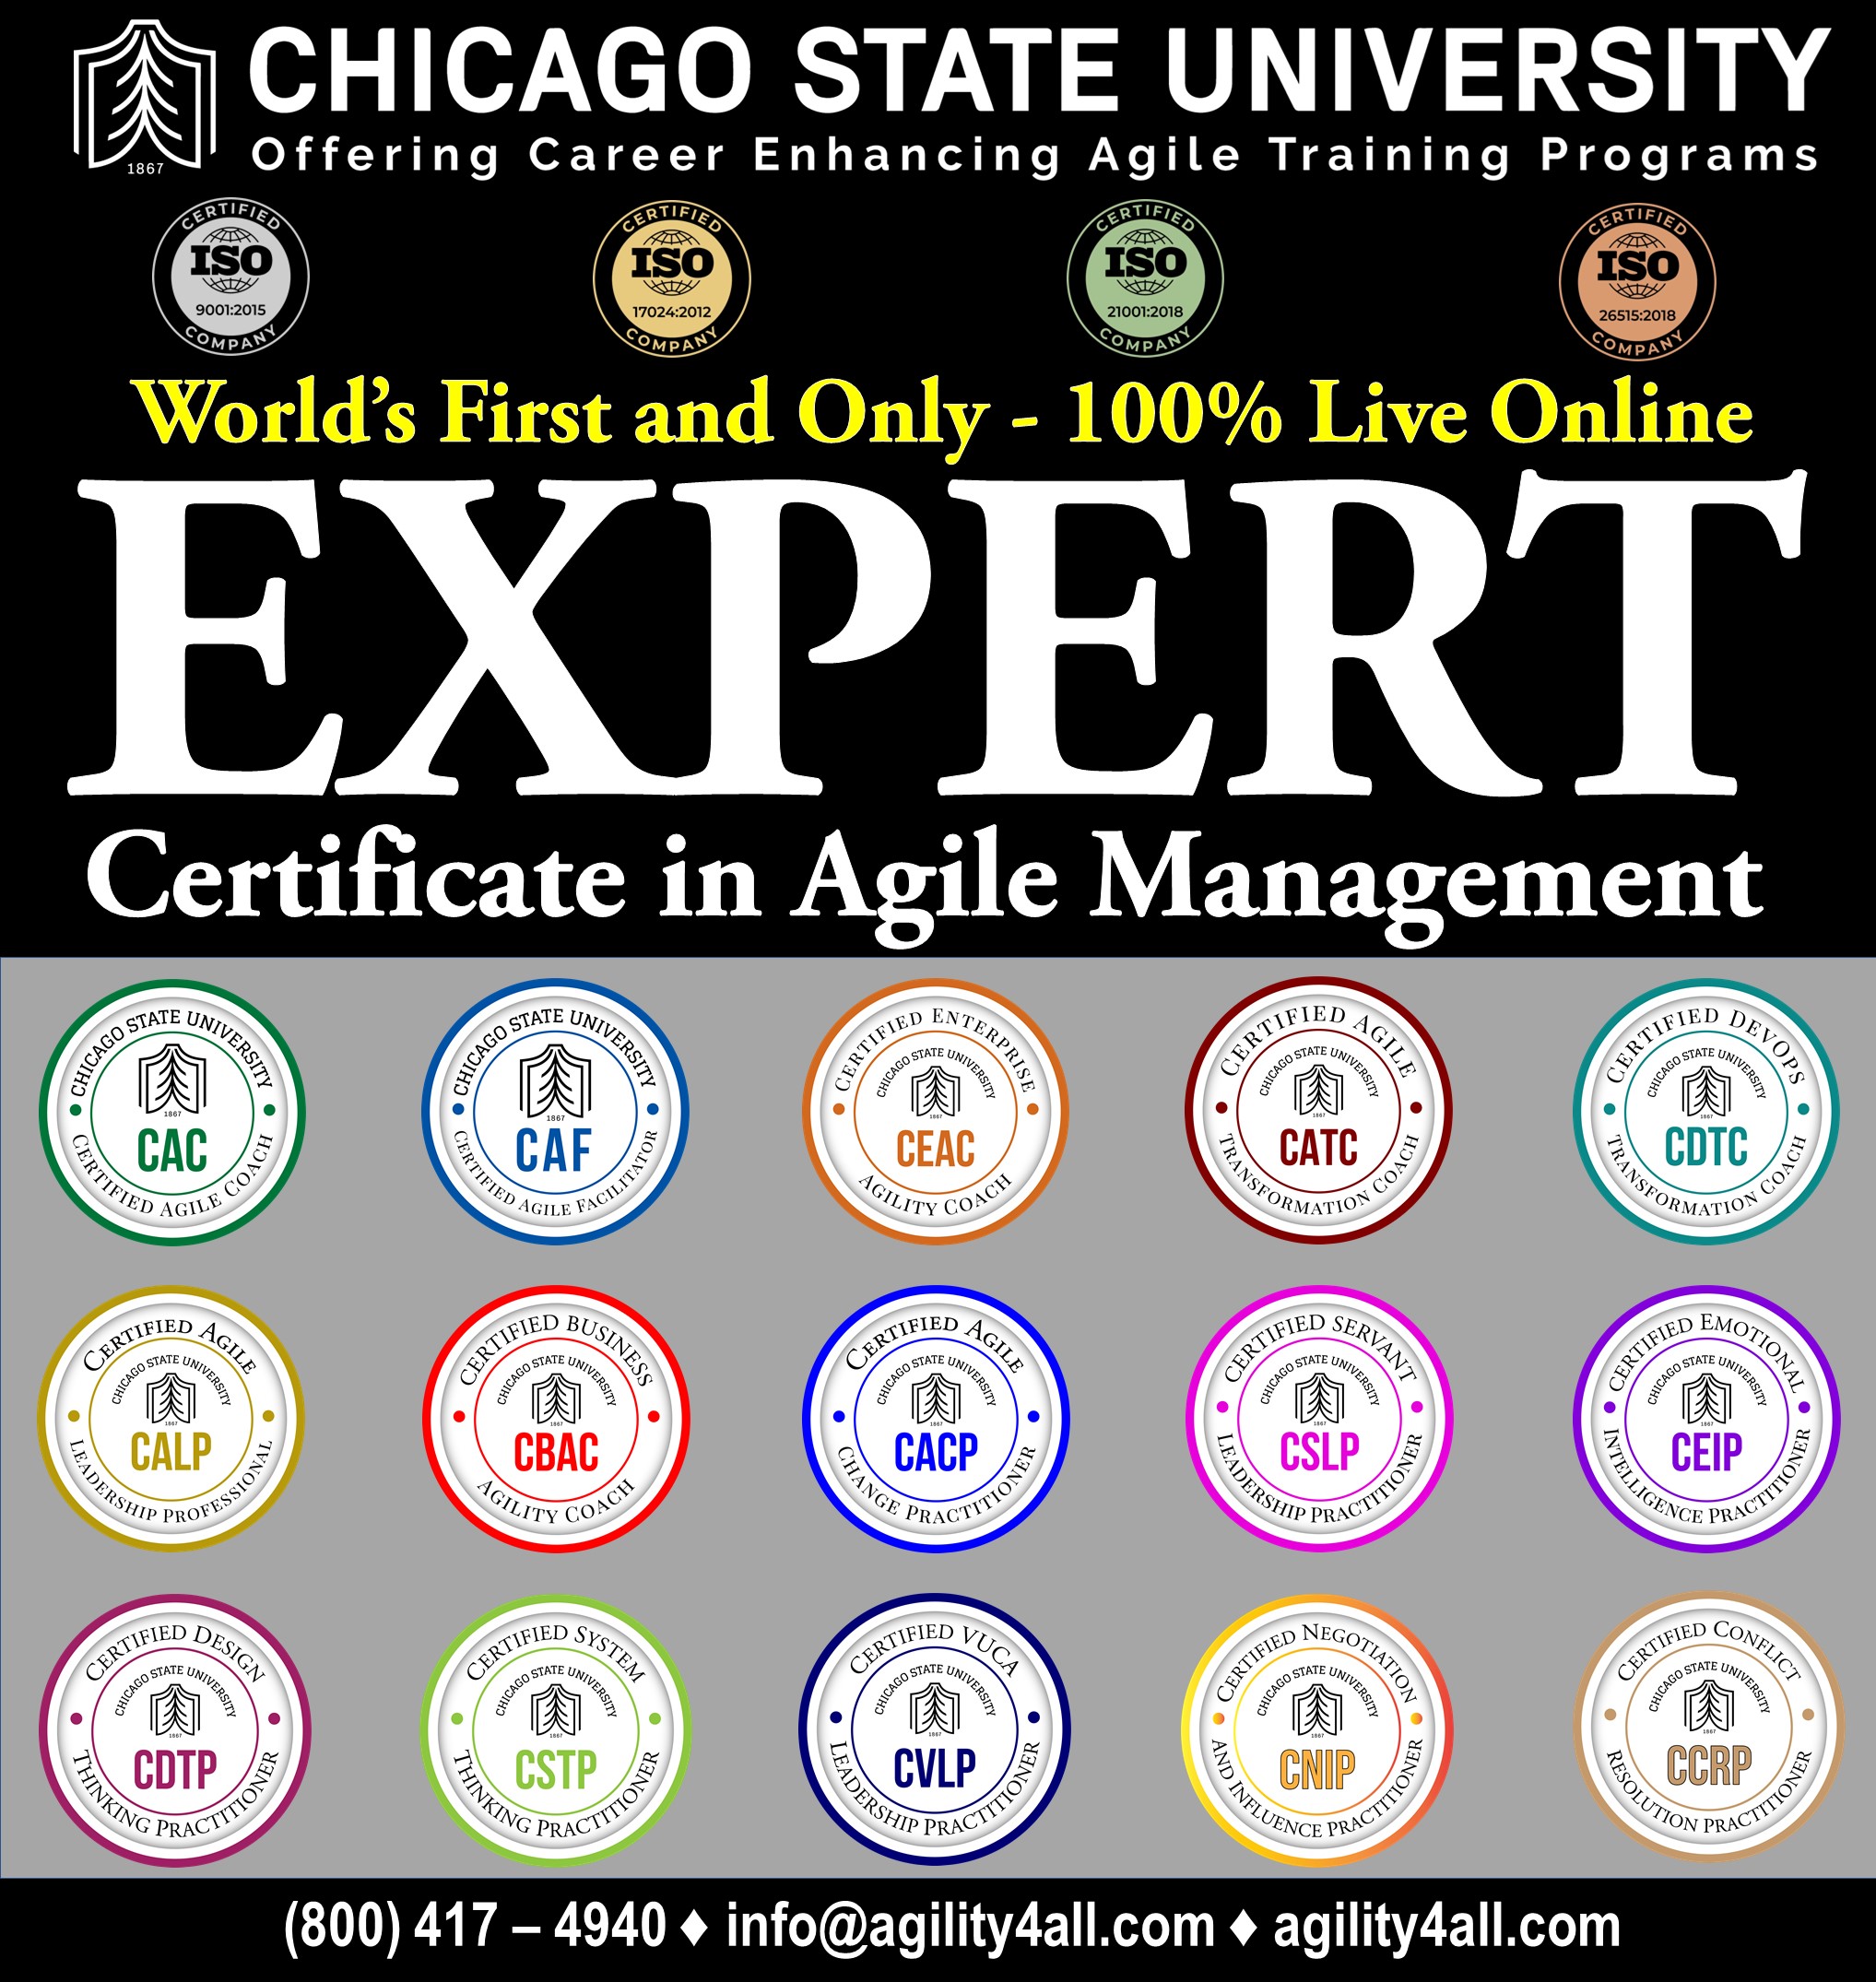 Expert Certificate in Agile Management (ECAM) from Chicago State University 